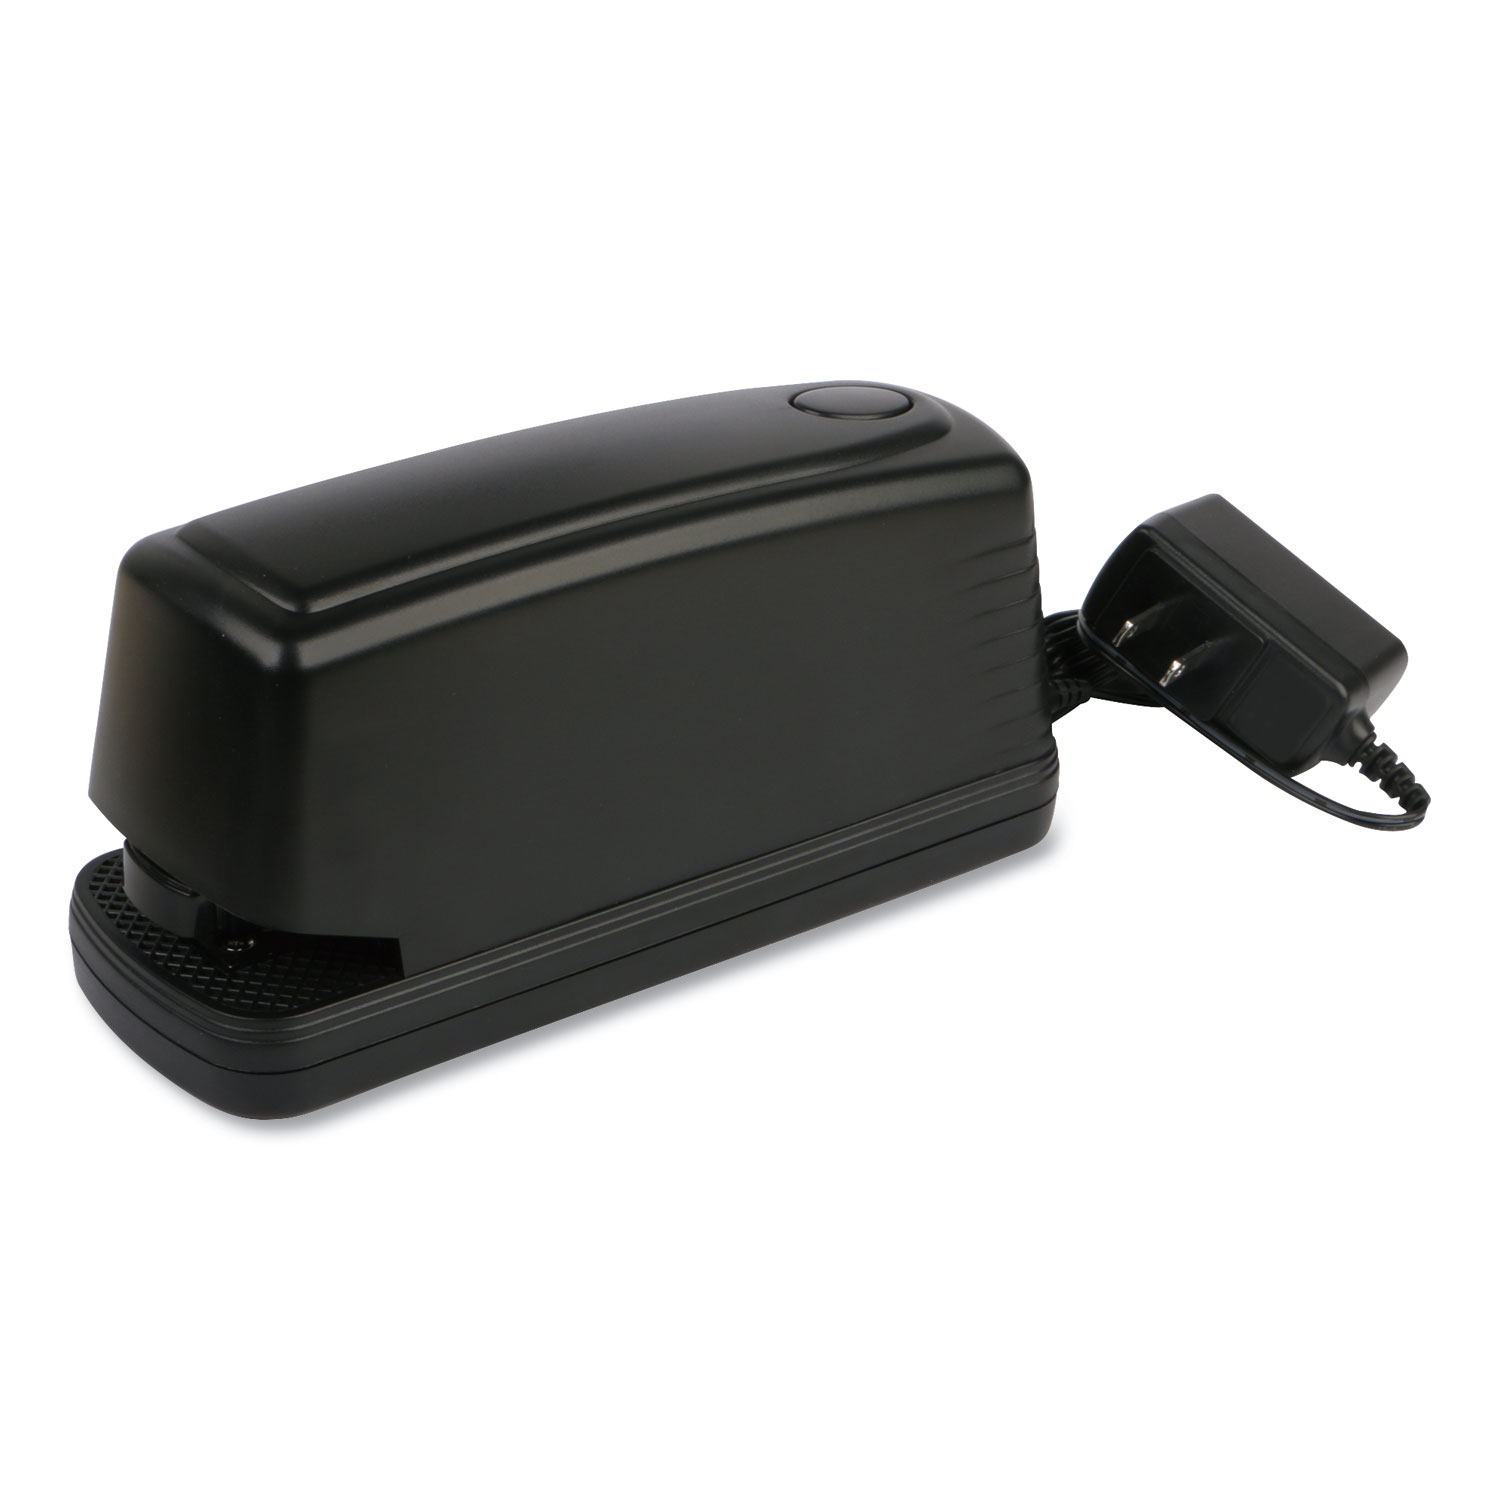  Universal RS-9001 Electric Stapler with Staple Channel Release Button, 30-Sheet Capacity, Black (UNV43122) 